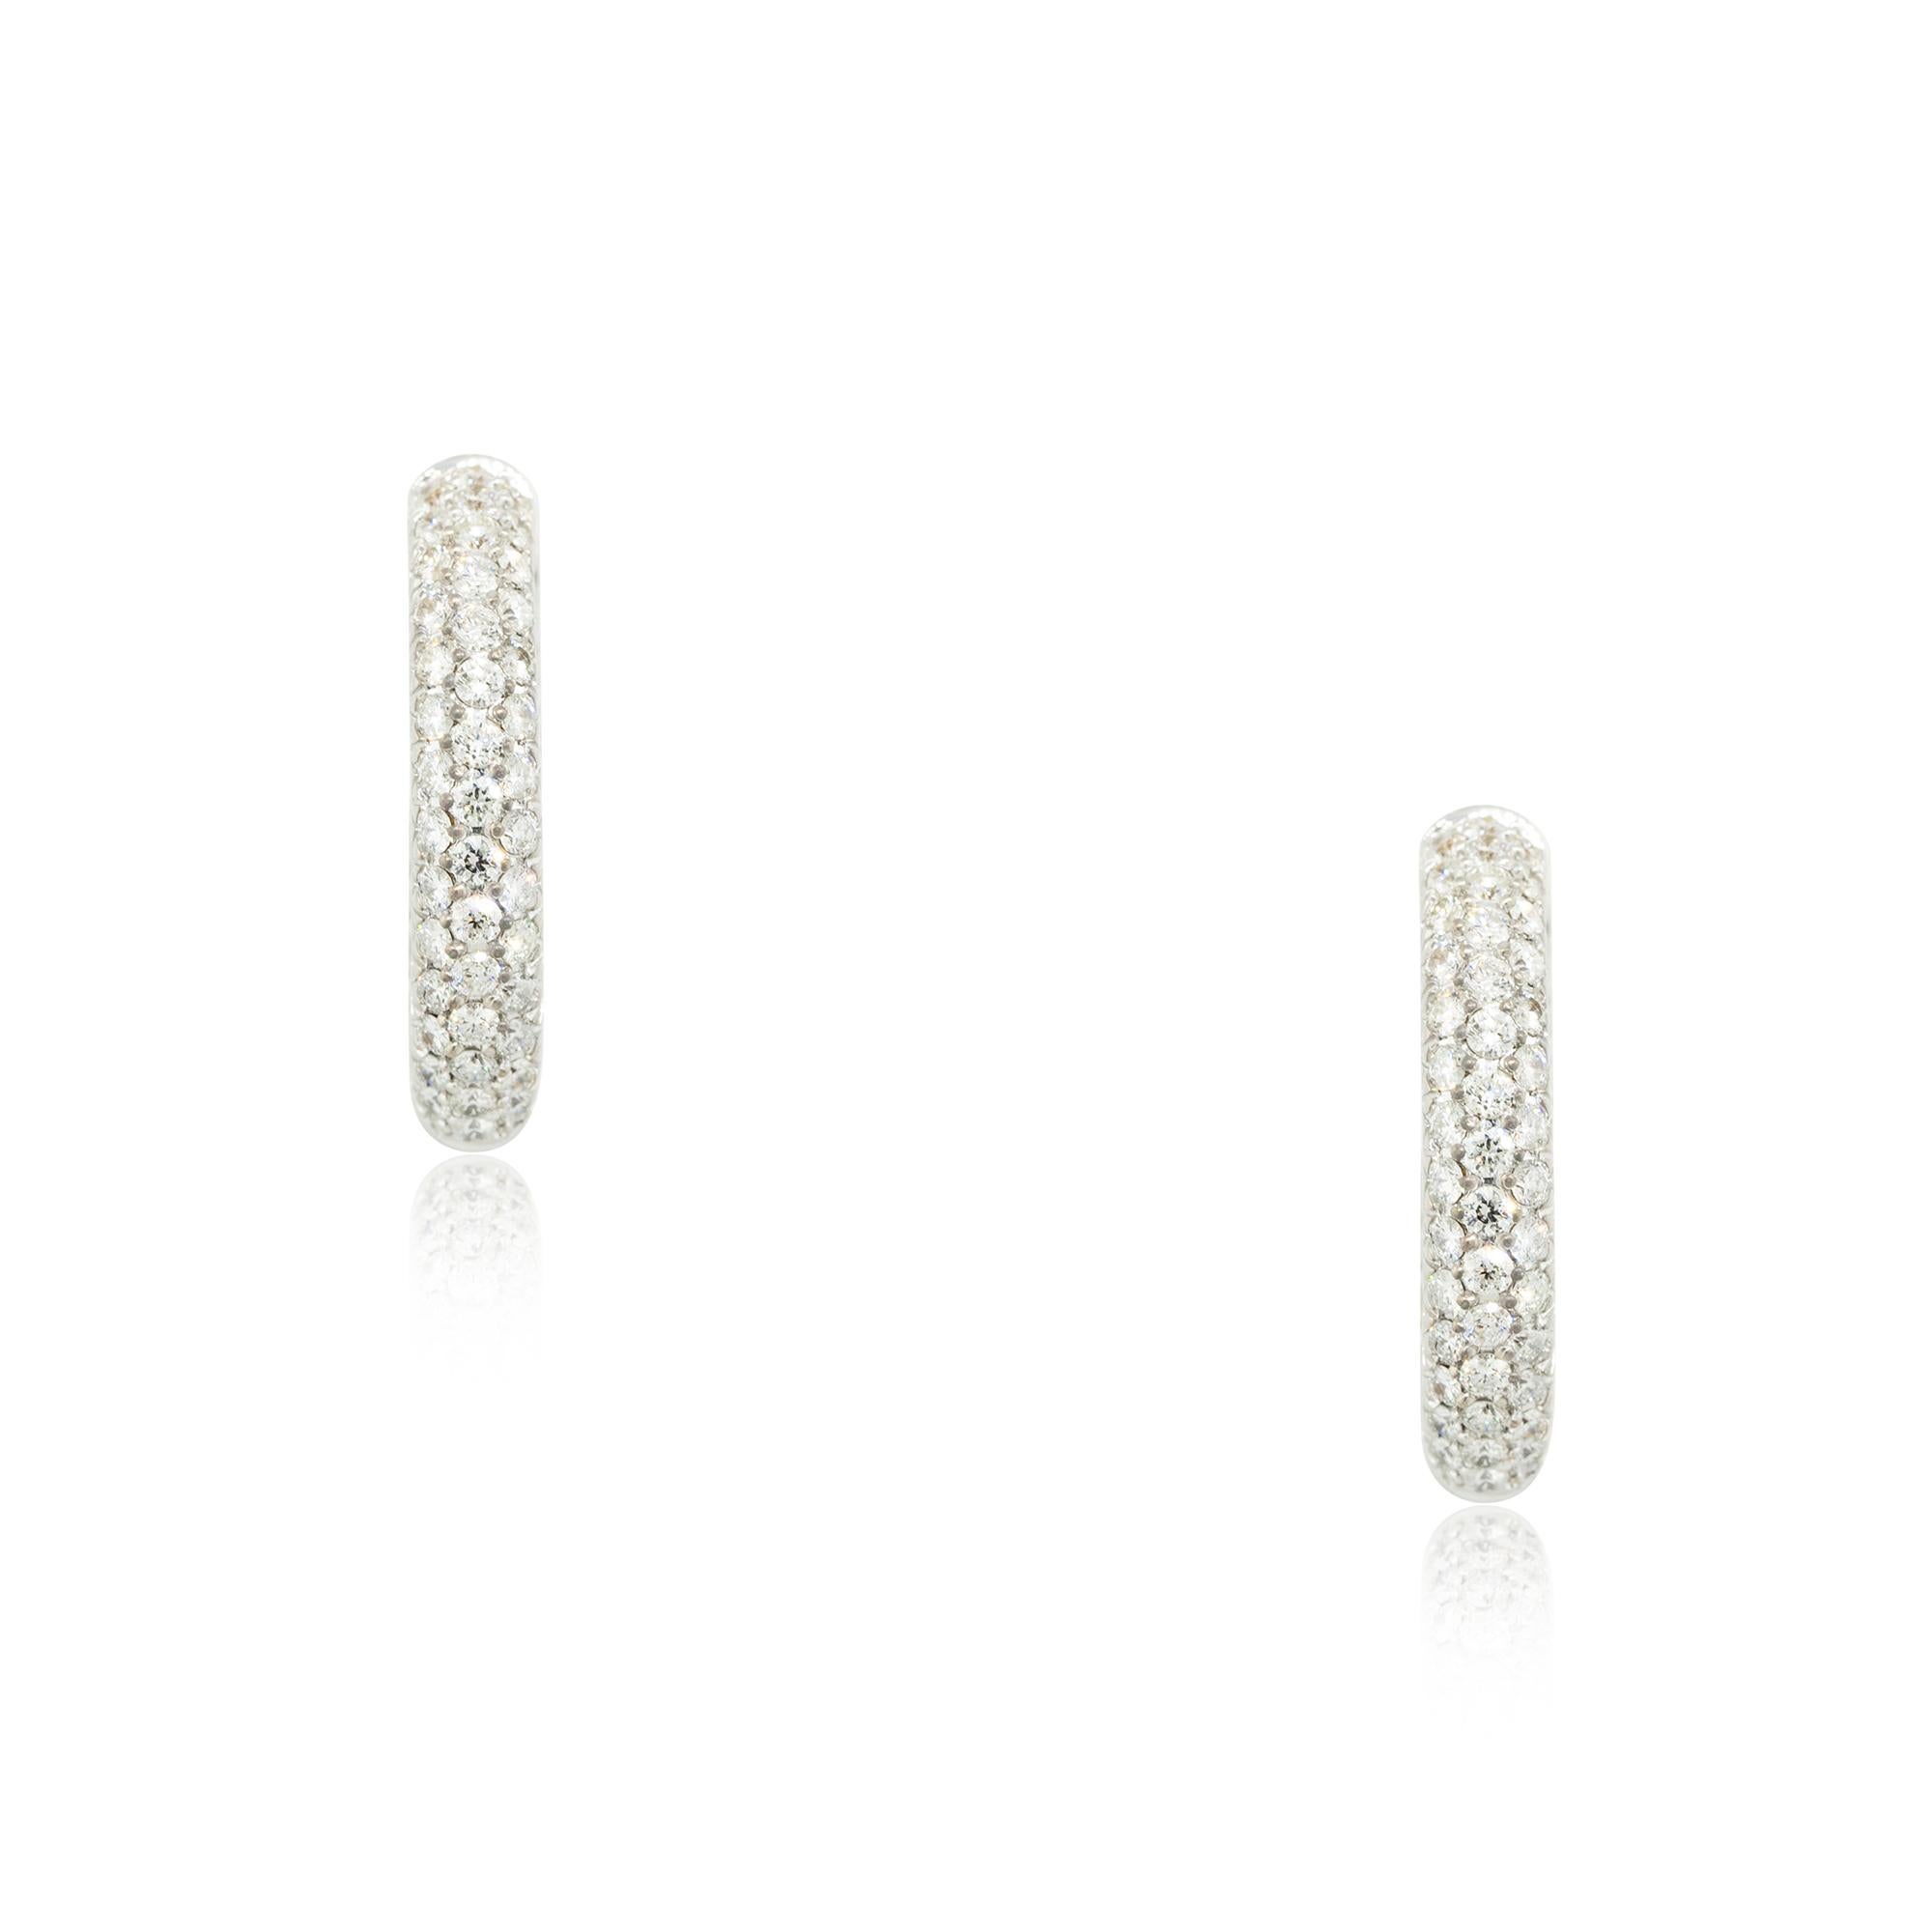 Material: 18k White Gold
Diamond Details: Approx. 4.25ctw of round cut Pave set Diamonds. Diamonds are set inside-out. Diamonds are H/I in color and SI in clarity
Total Weight: 12.4dwt 
Earring Backs: Latch Backs
Additional Details: This item comes